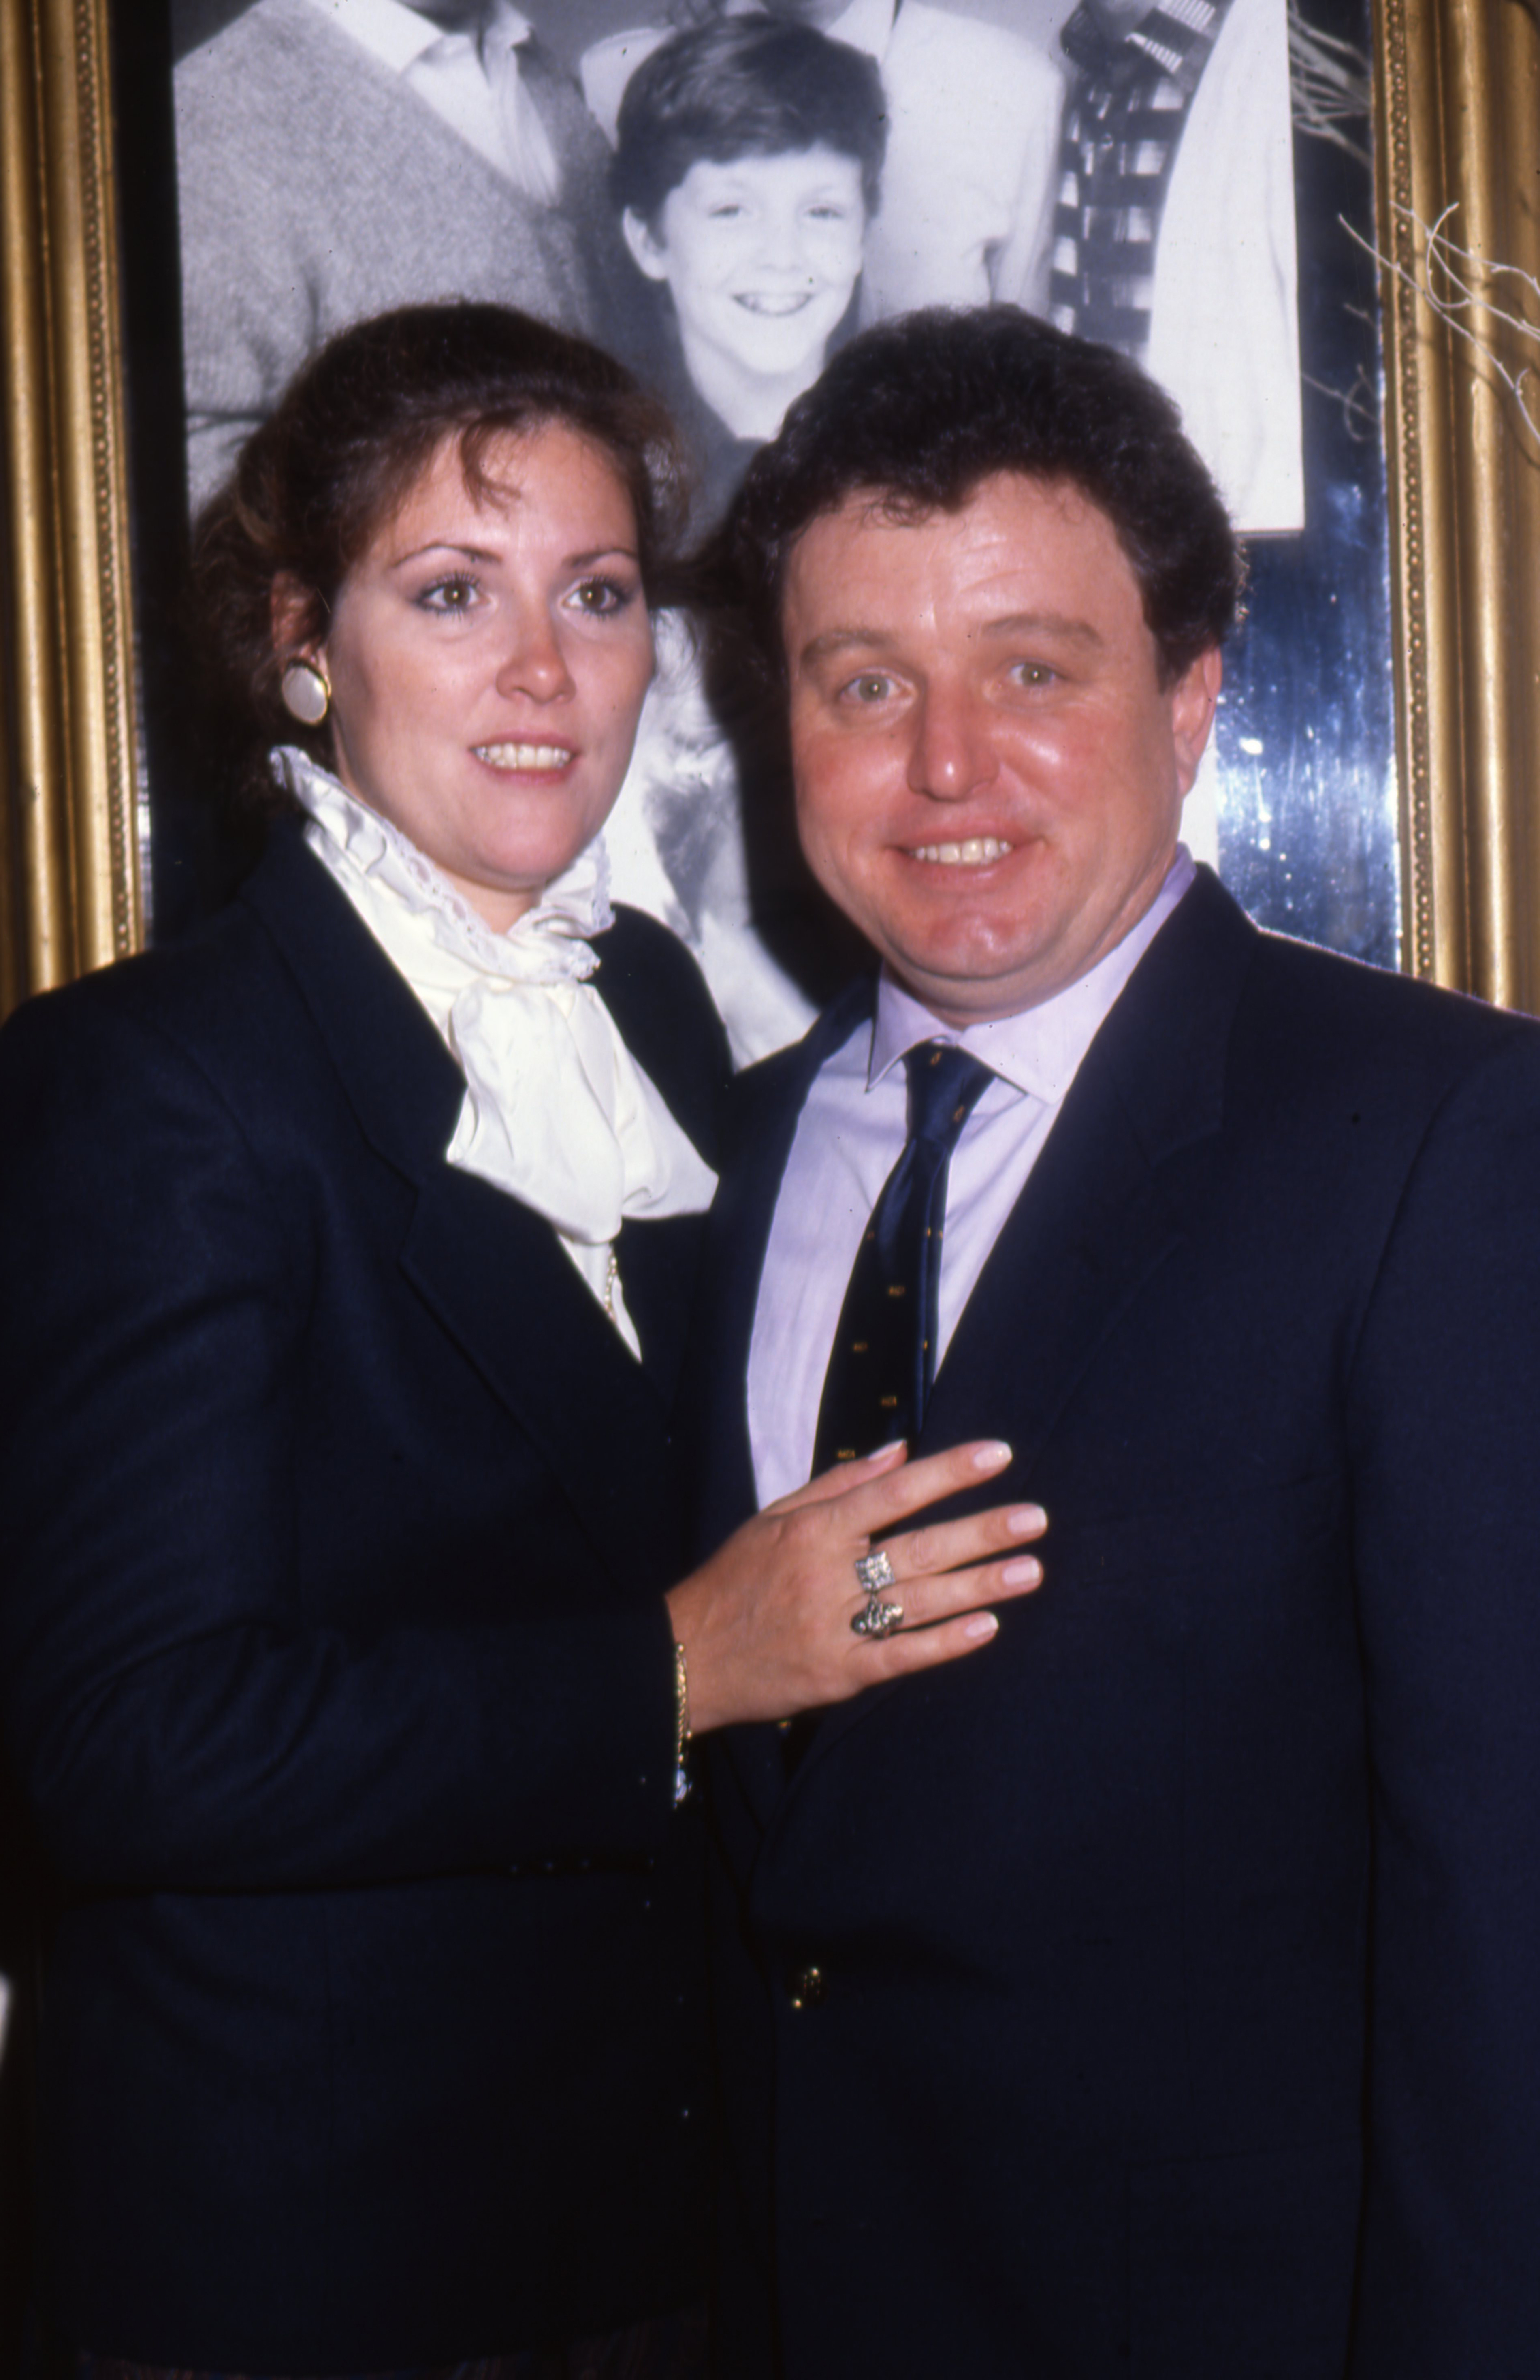 Jerry Mathers and Rhonda Gehring in Los Angeles, California, in 1986 | Source: Getty Images